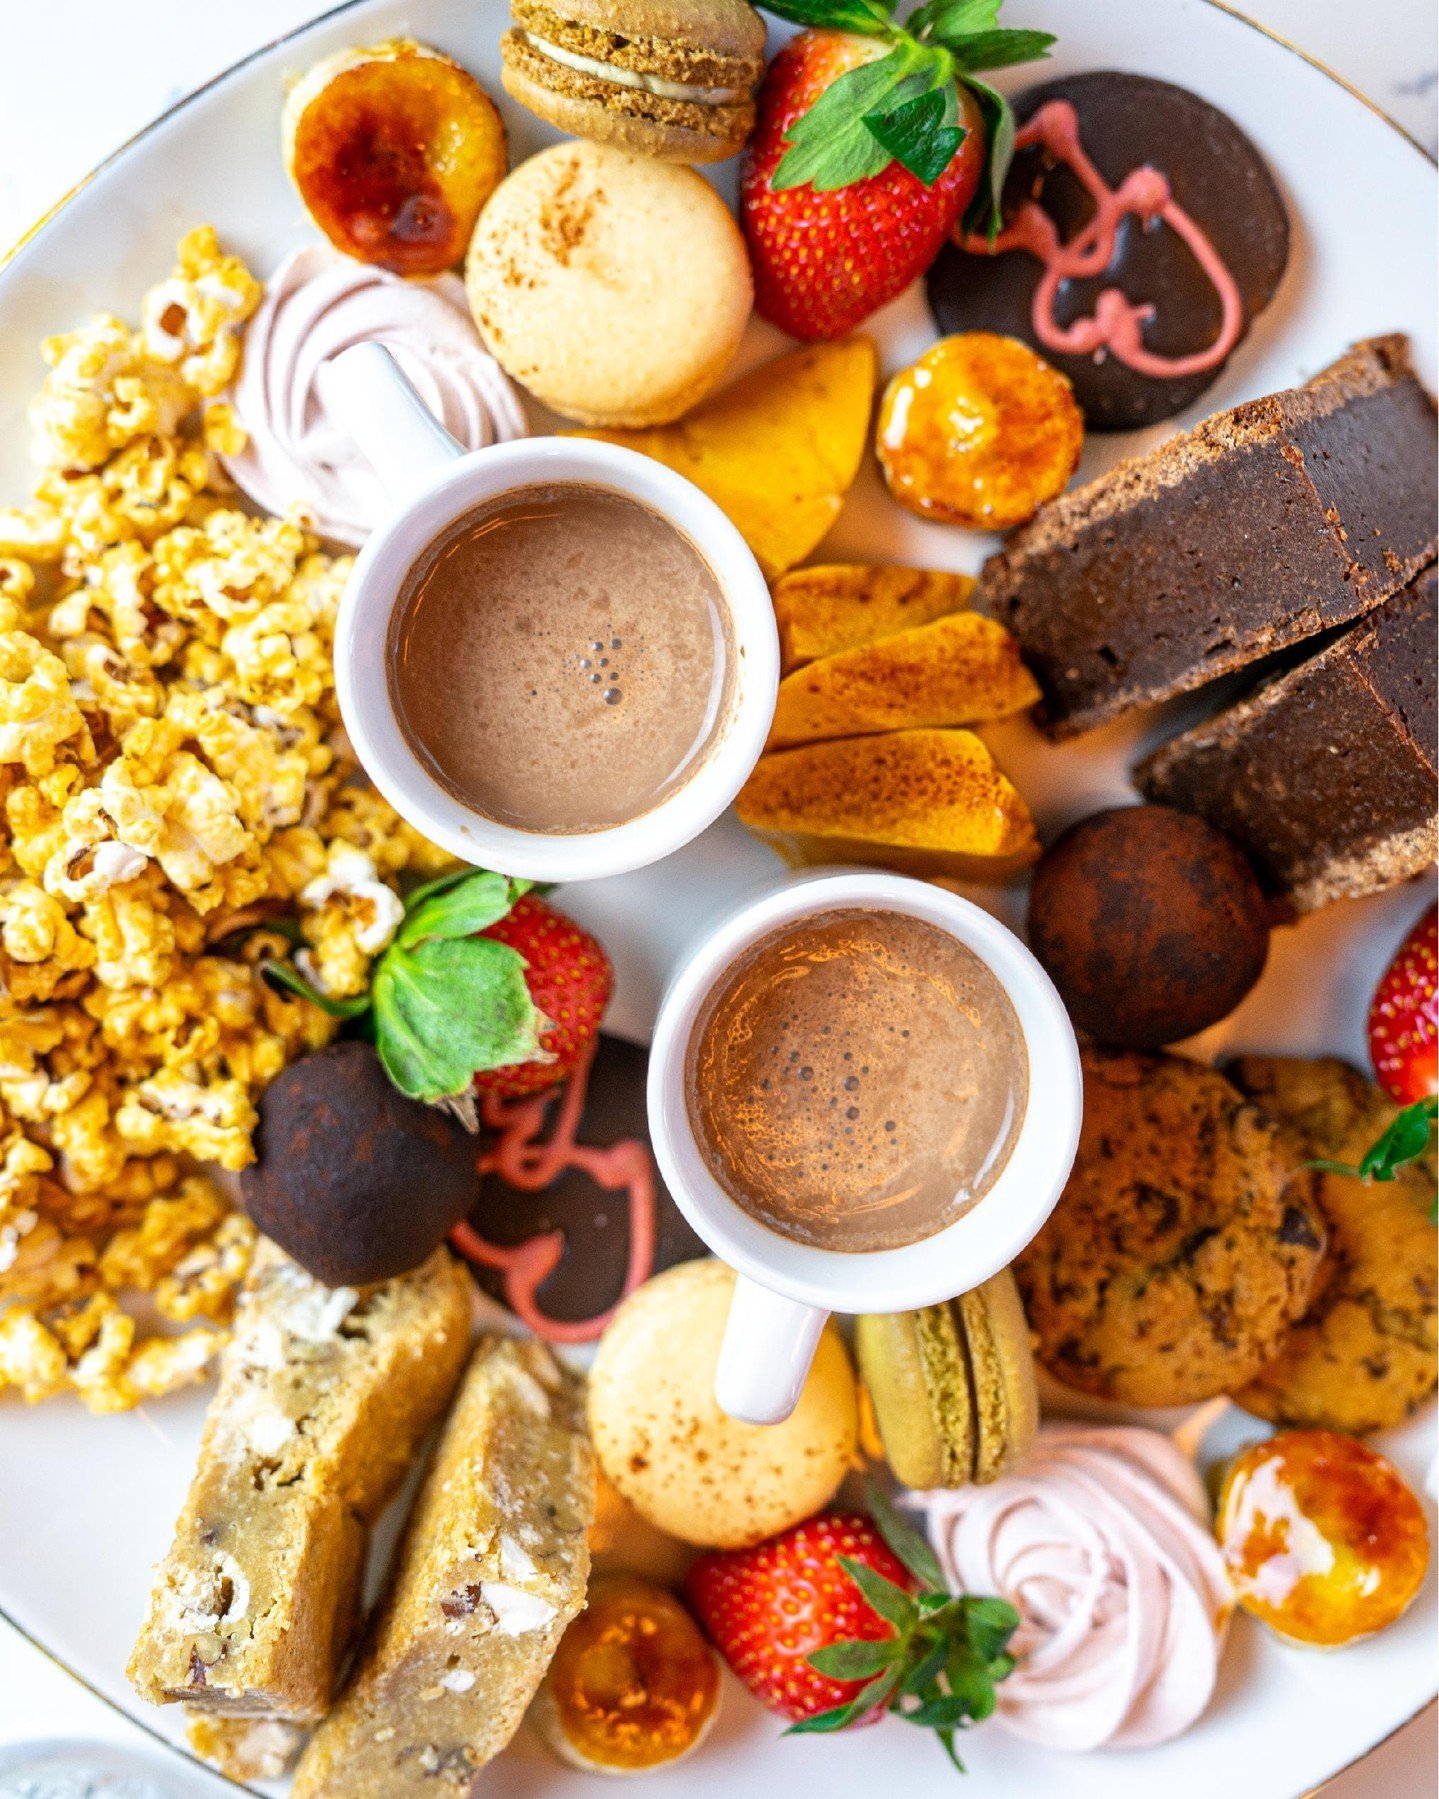 Daydreaming about dessert...🫣

Lover's Plate: A Sampling of Baileys&rsquo; Signature Desserts including
brownies &bull; blondies &bull; macarons &bull; chocolate inebriation truffles
with meringues &bull; strawberry kisses &bull; bourbon caramel cor